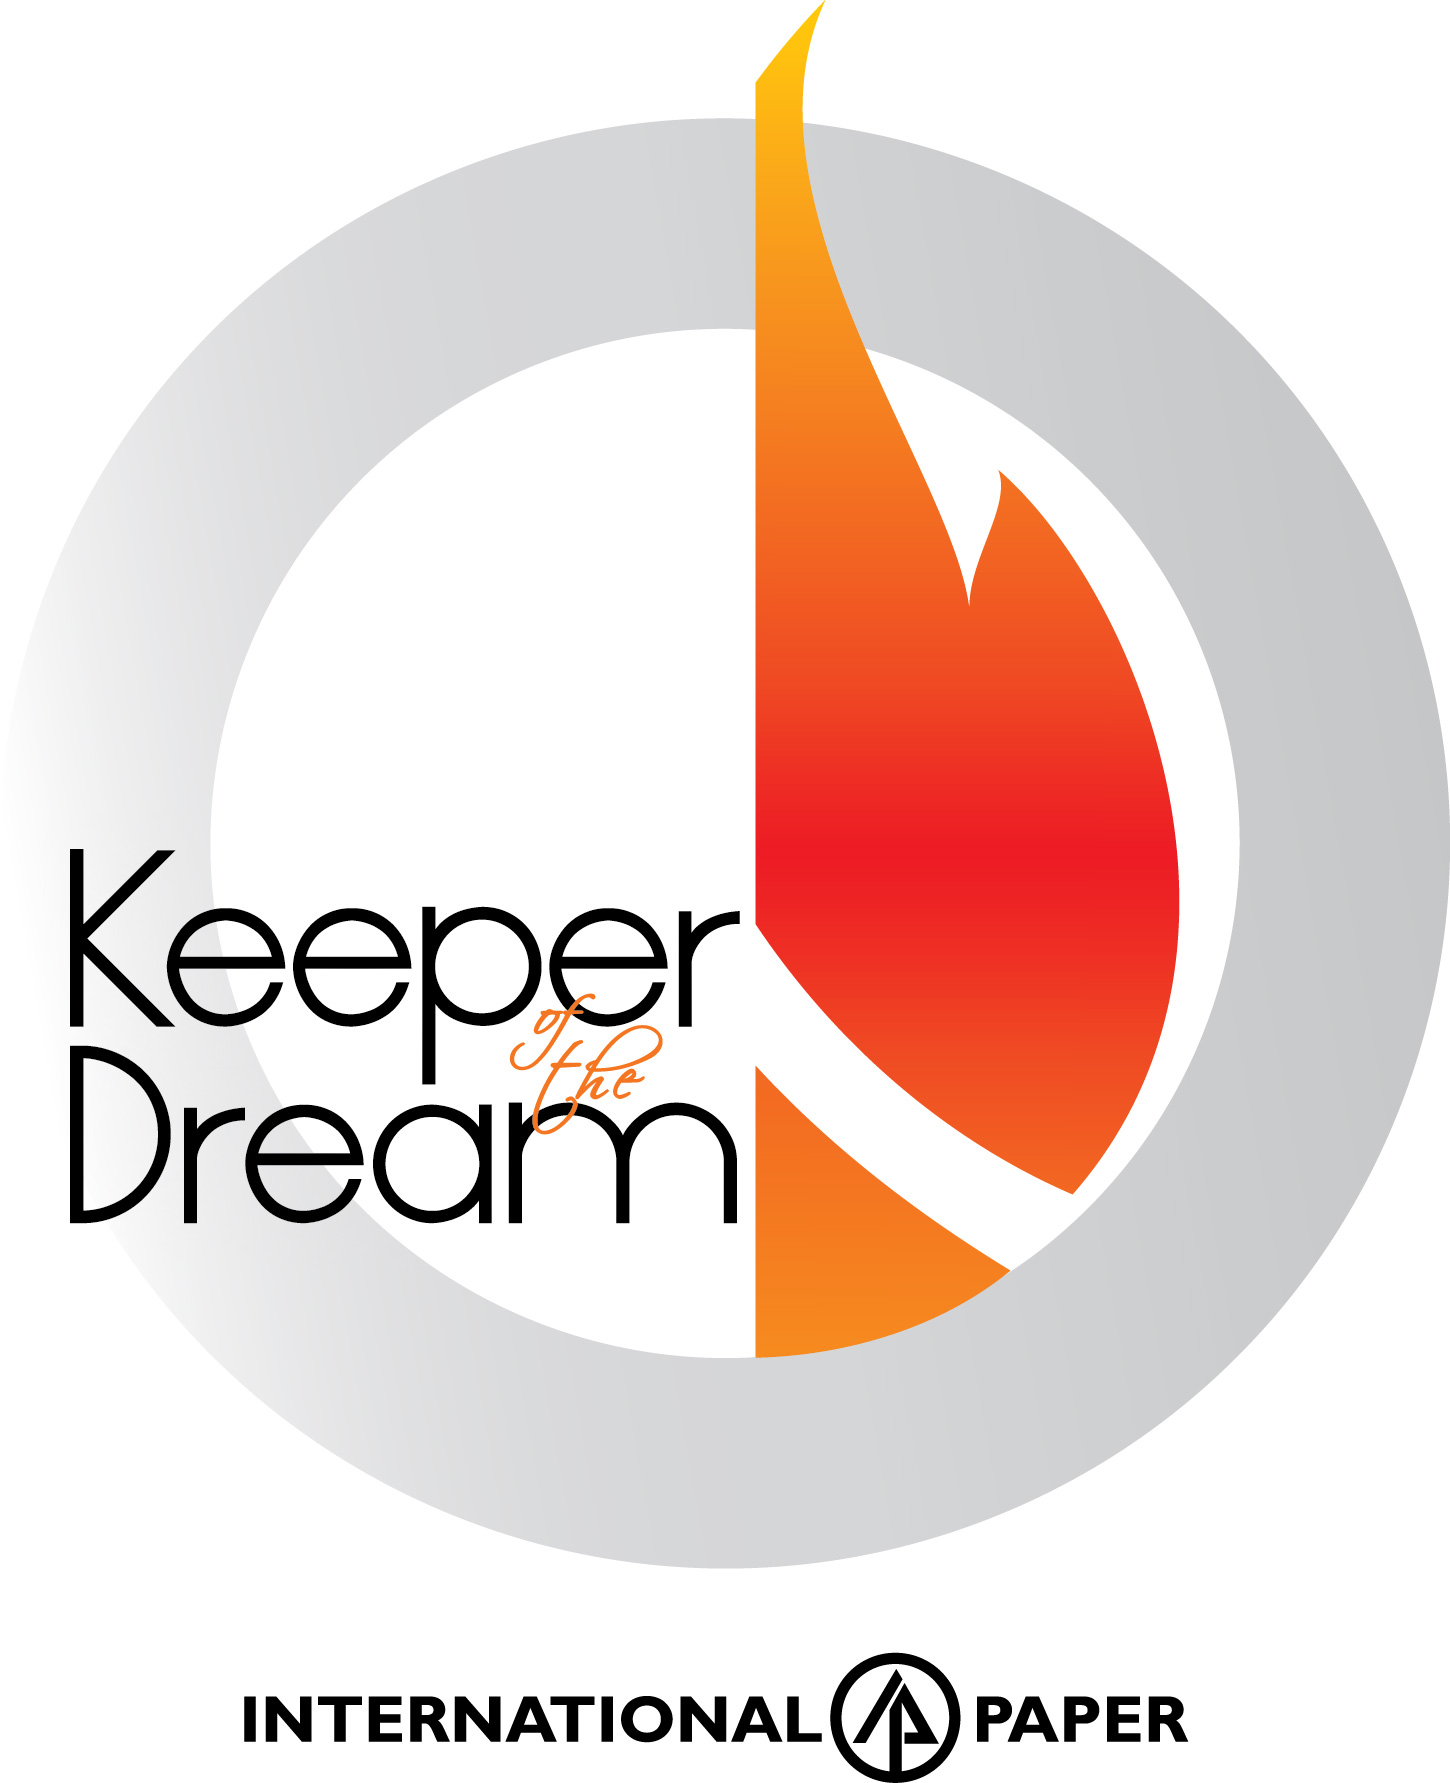 The Keeper of the Dream Award recognizes young people who have demonstrated extraordinary courage, compassion, leadership and service and are forging paths to expand opportunities for others.  